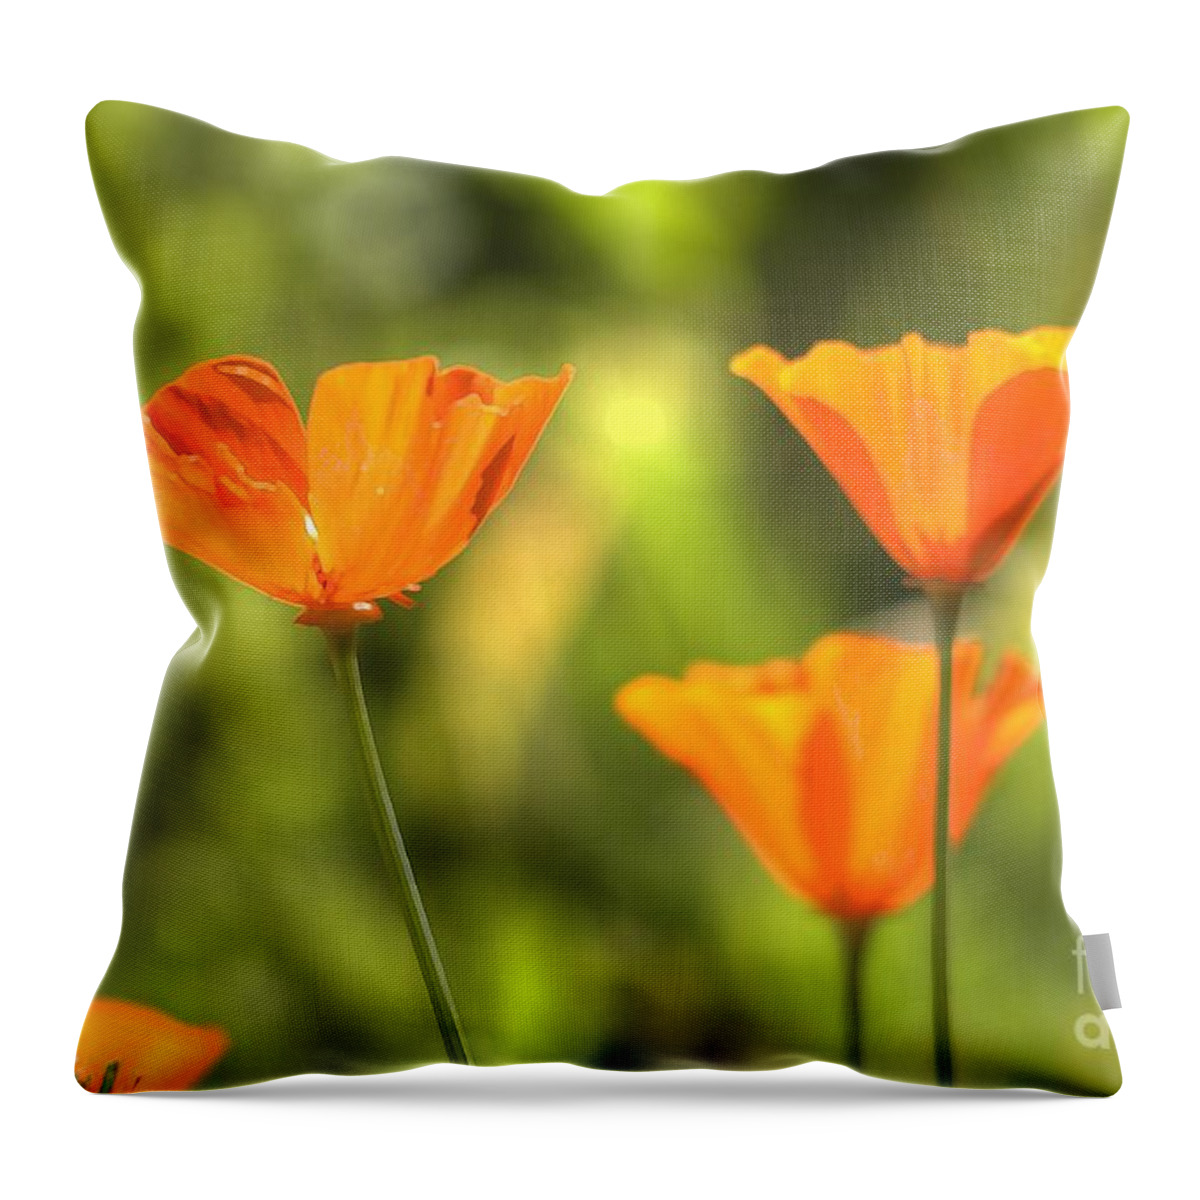 Poppies Throw Pillow featuring the photograph Poppies by Marc Bittan